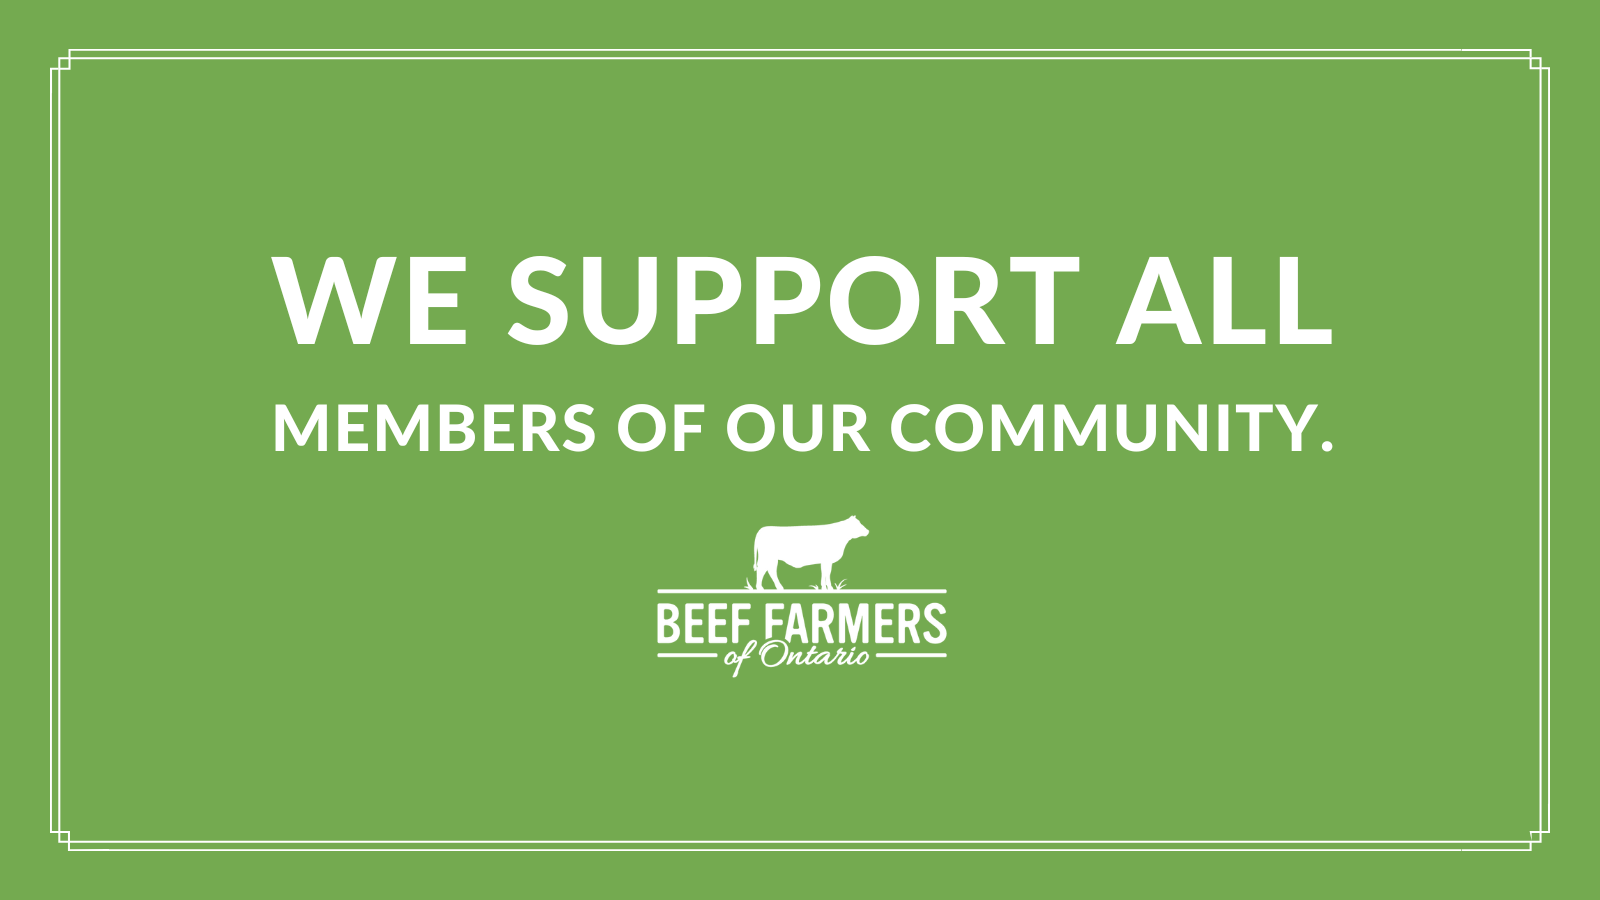 We support all members of our community.